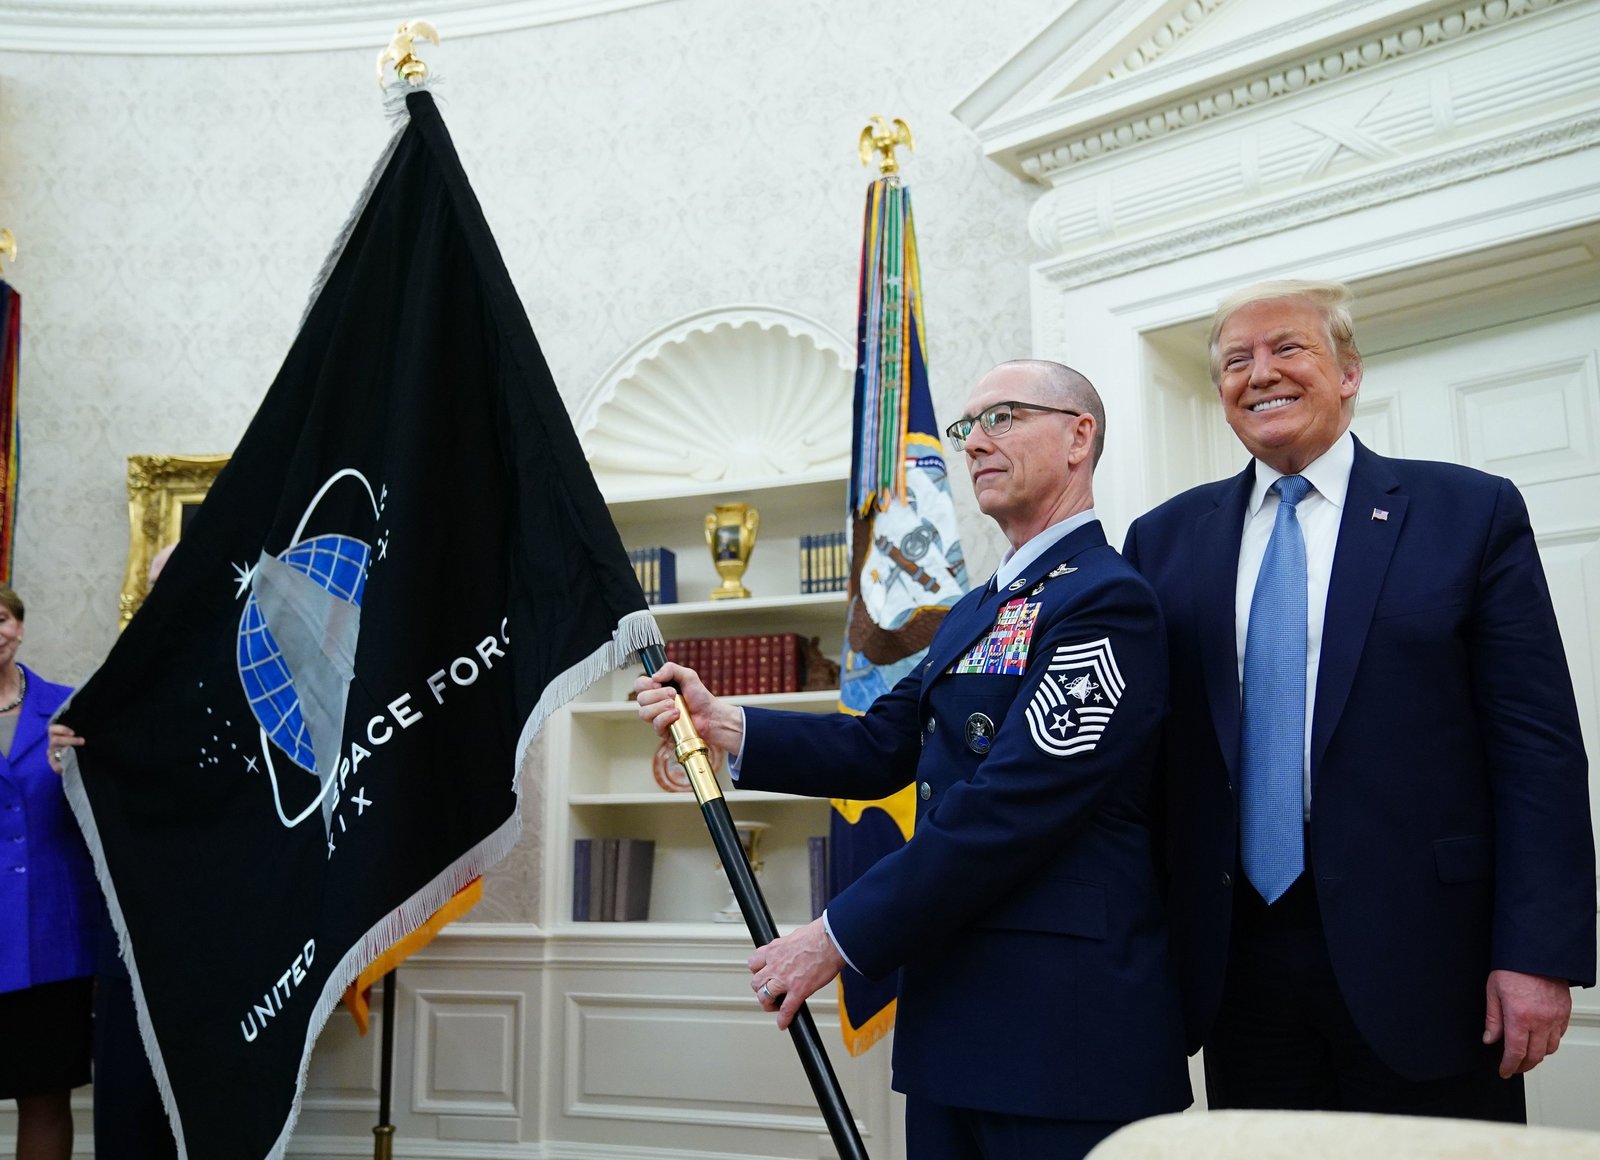 U.S.-Space-Force-senior-enlisted-adviser-Chief-Master-Sgt.-Roger-Towberman-presents-the-Space-Force-Flag-to-President-Trump-on-Friday-in-the-Oval-Office.